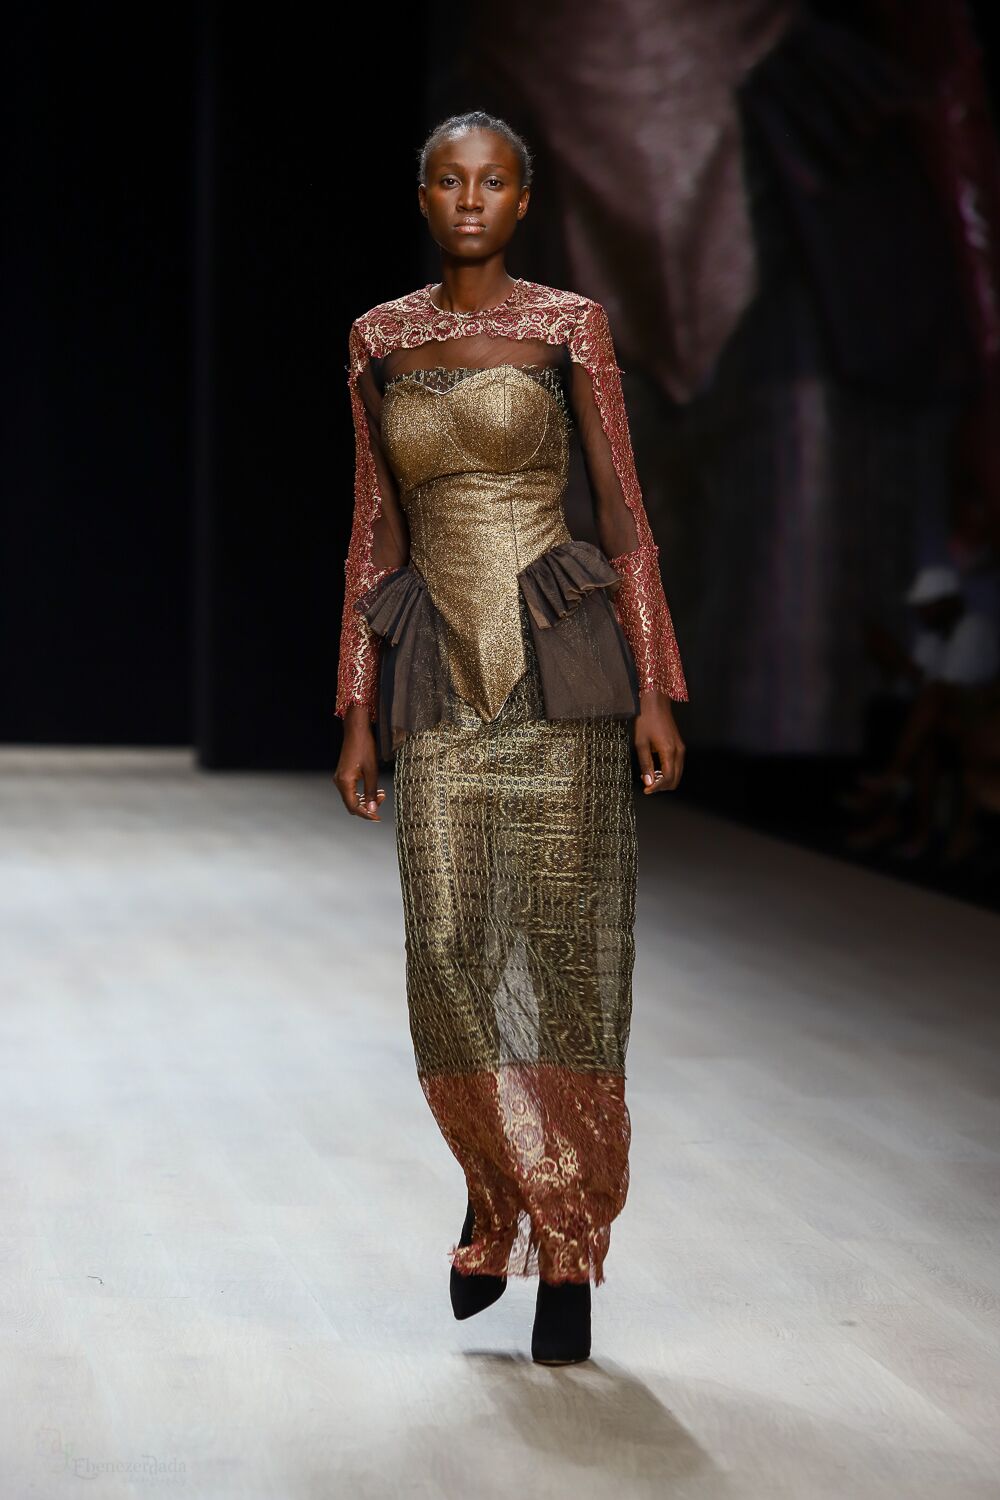 Odio Mimonet Showcased Wearable Art On The Runway